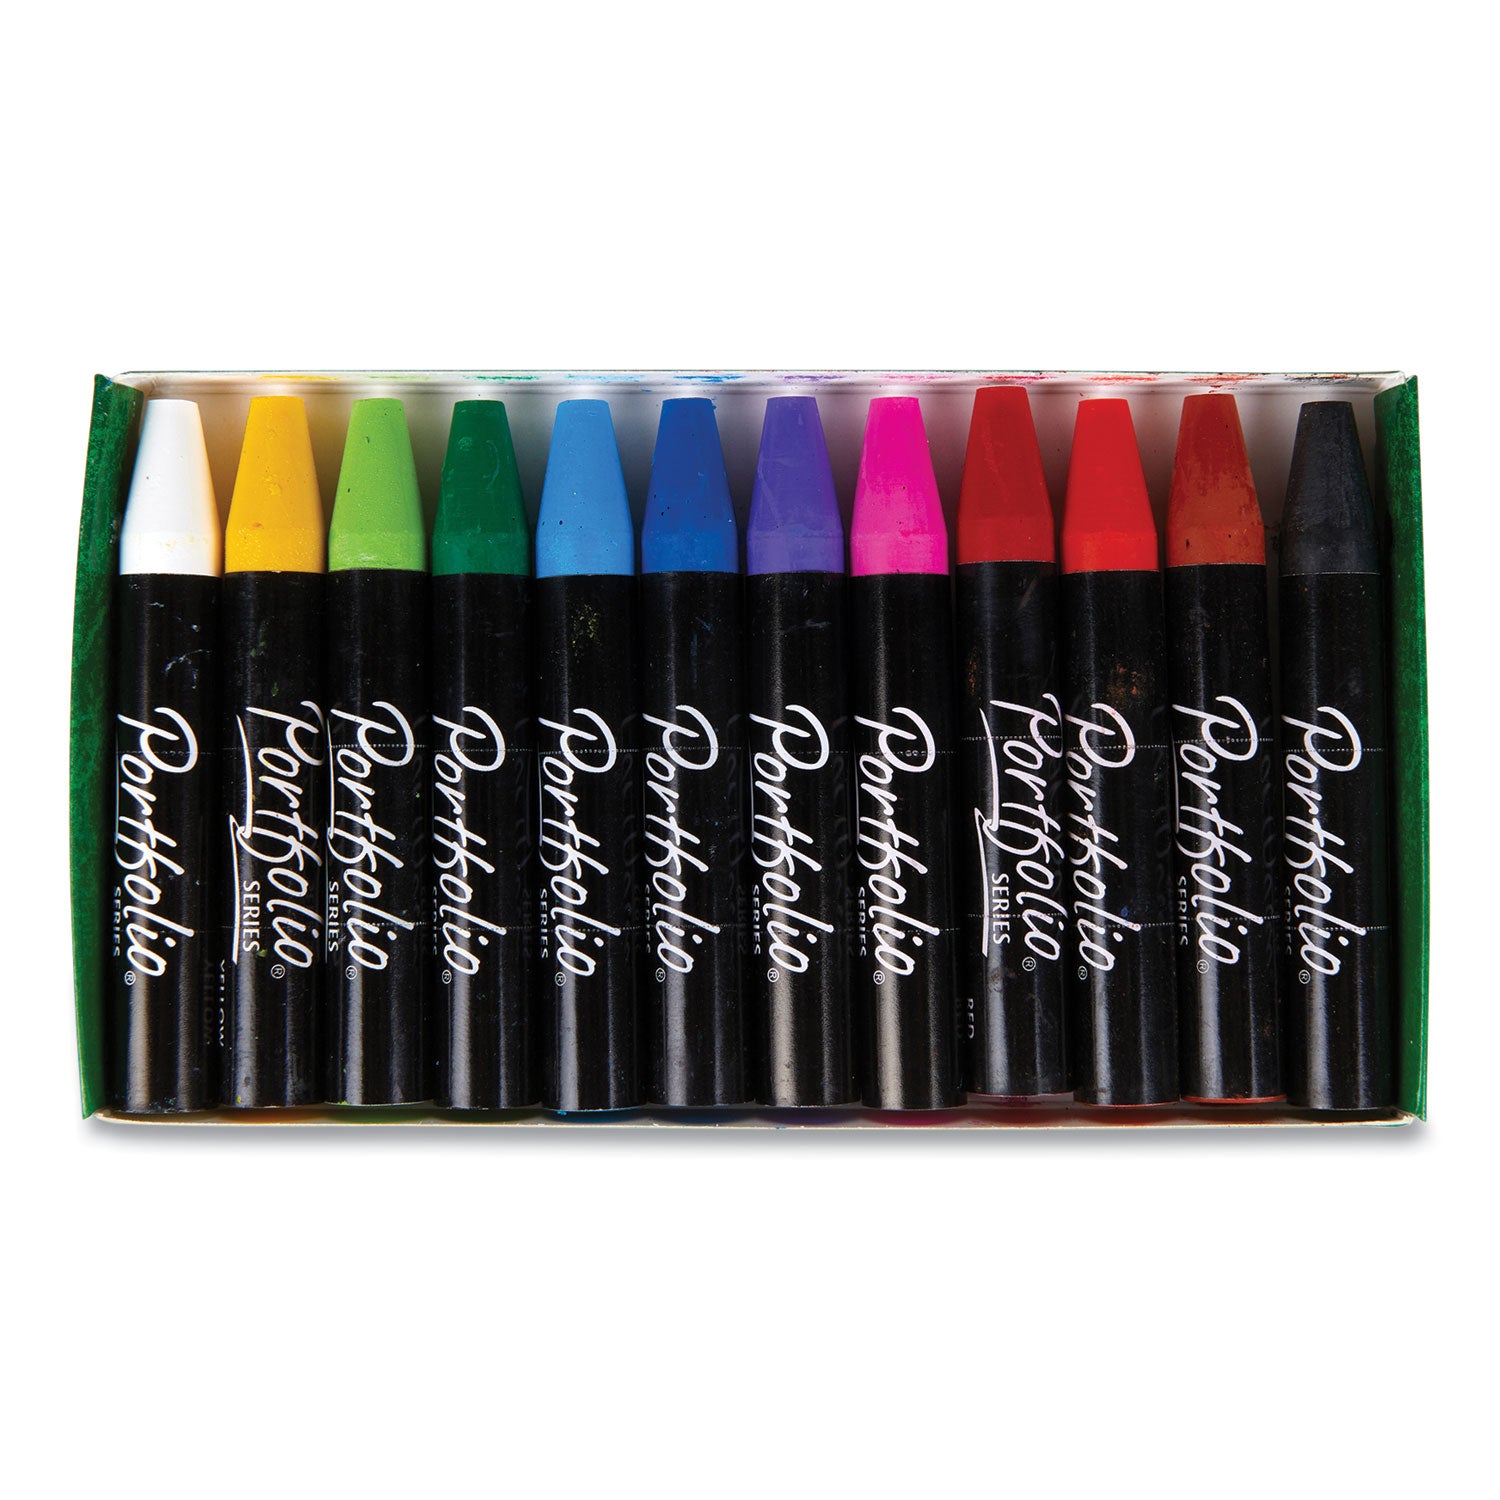 portfolio-series-oil-pastels-12-assorted-colors-12-pack_cyo523612 - 7